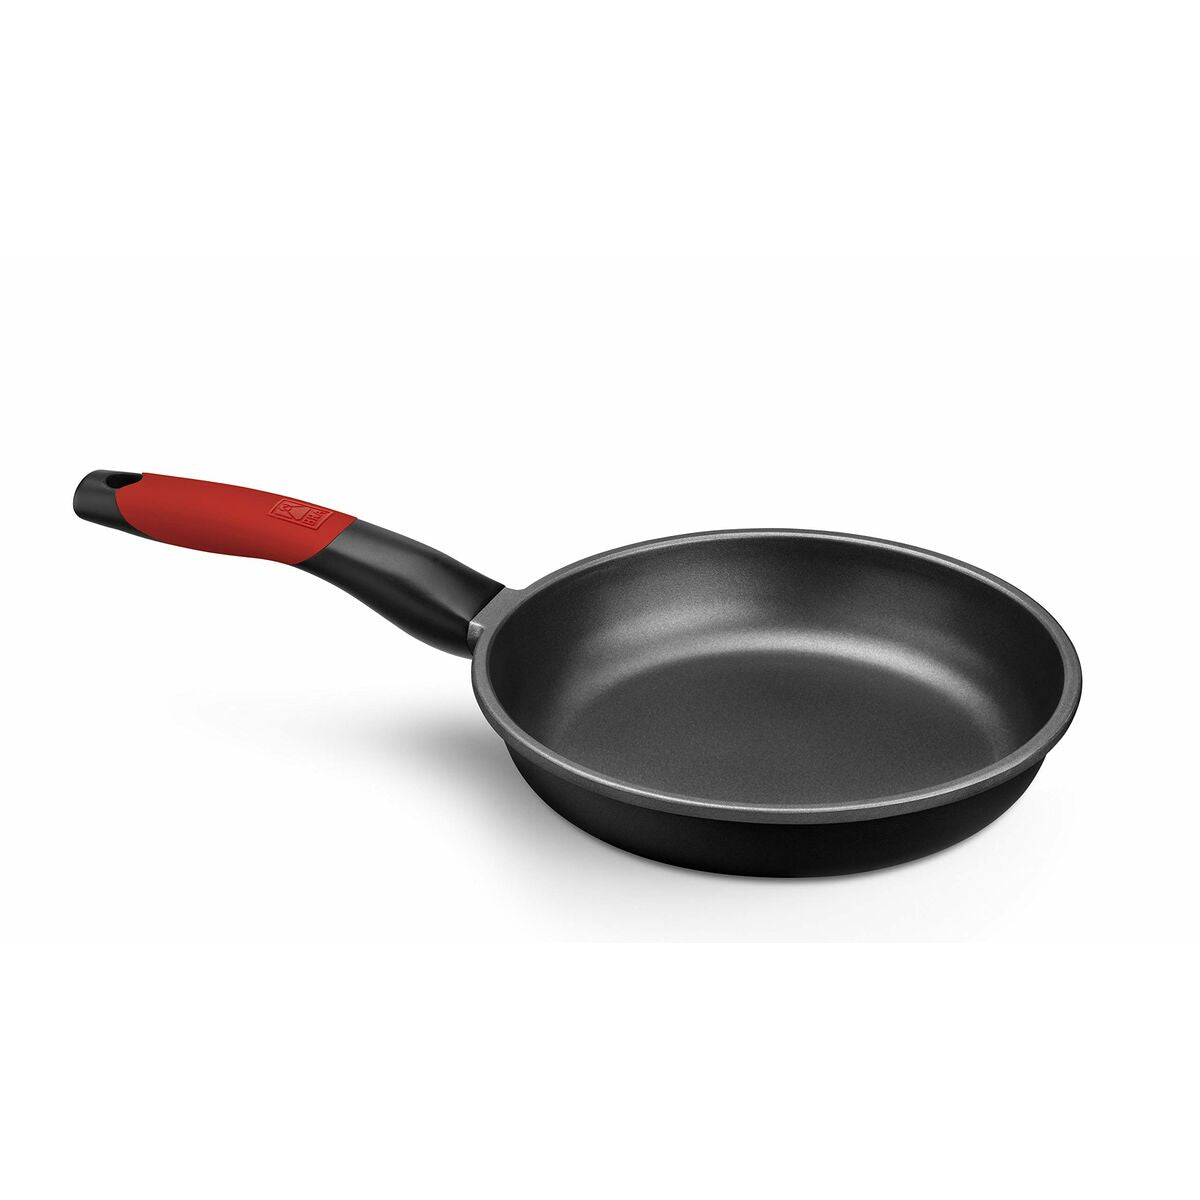 Non-stick frying pan BRA A411228 Black Red Stainless steel Aluminium